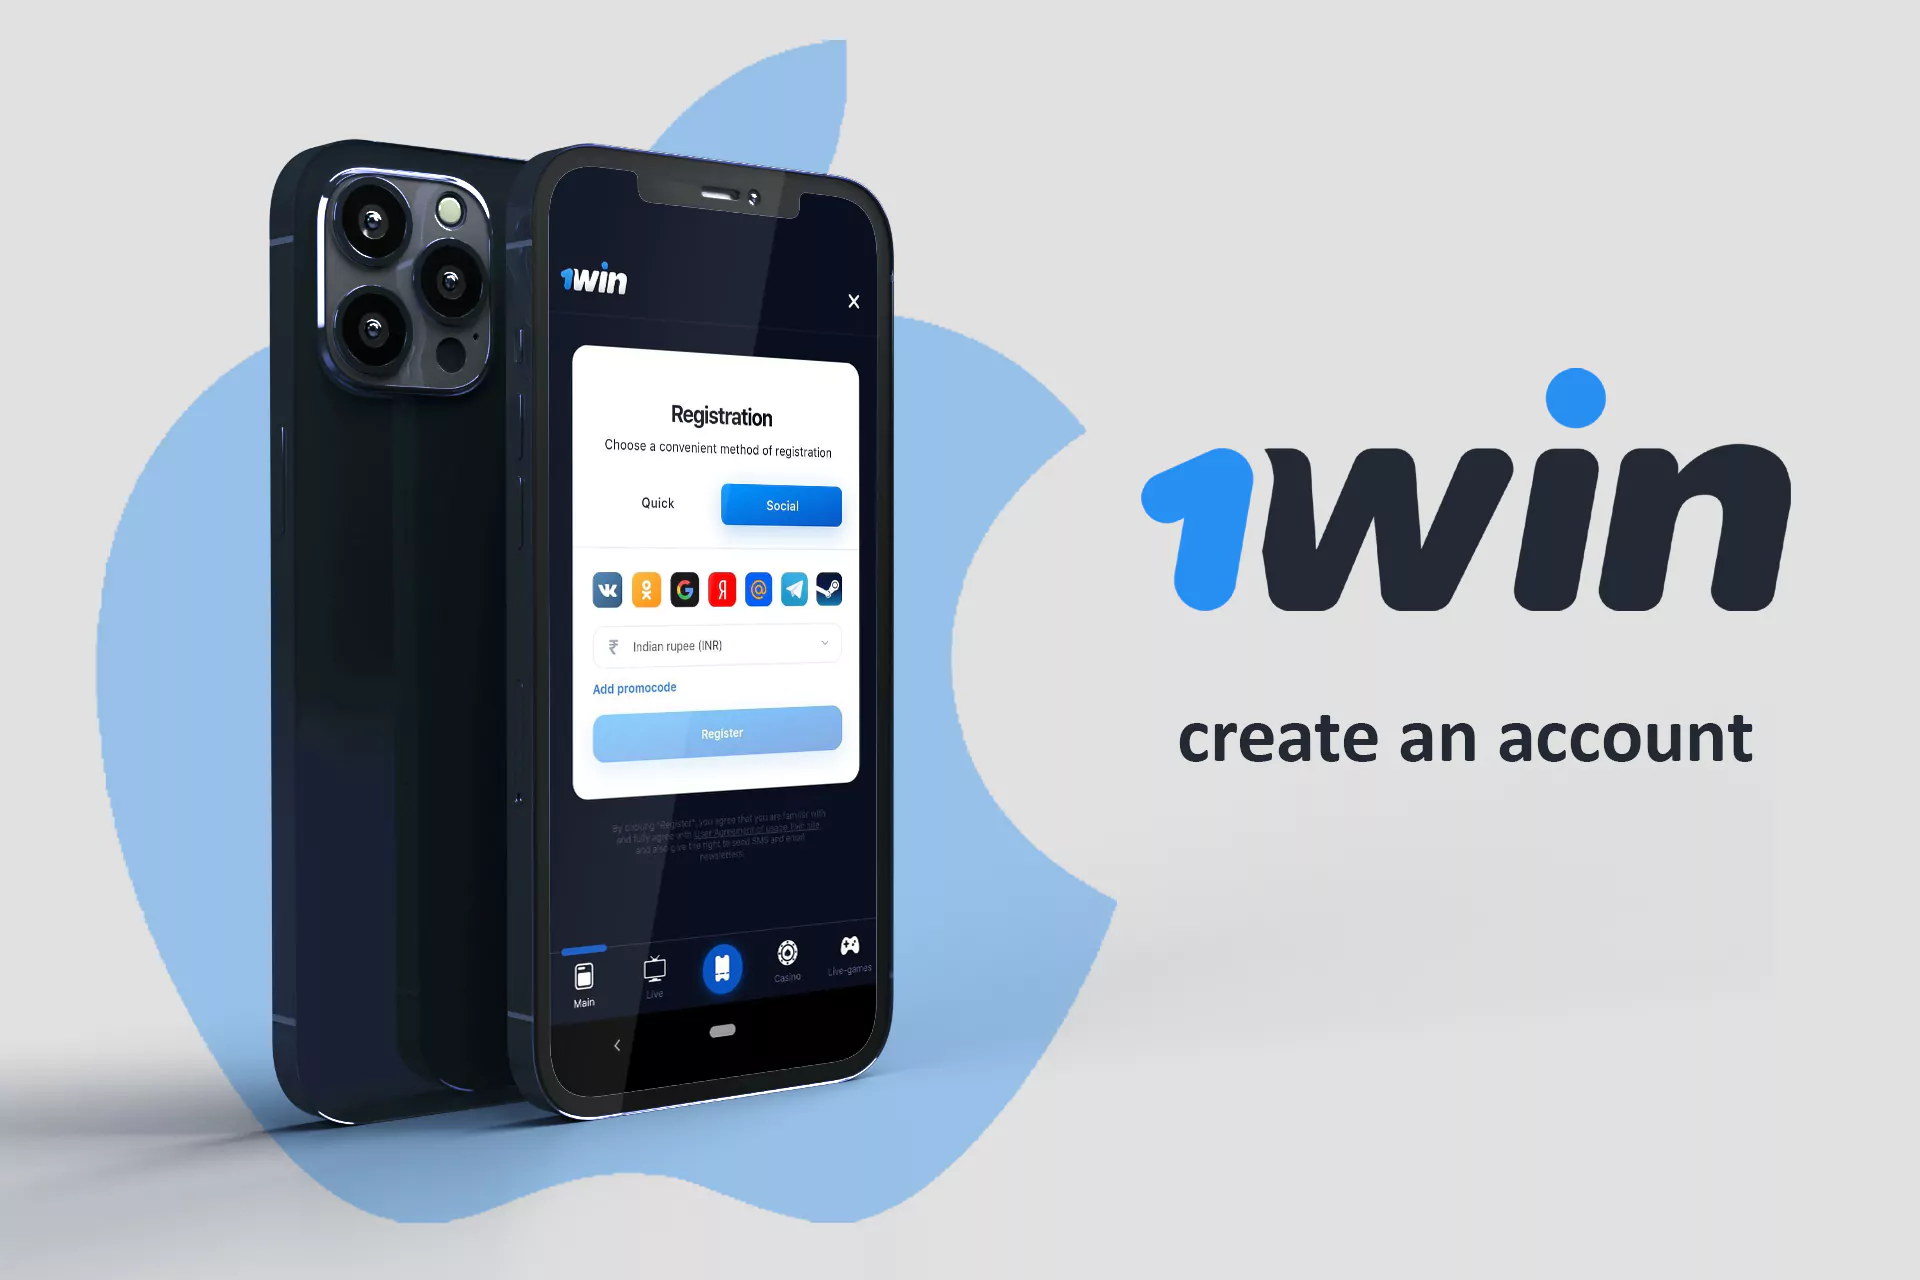 Click the "Sign up" button and create a new account at 1win App.